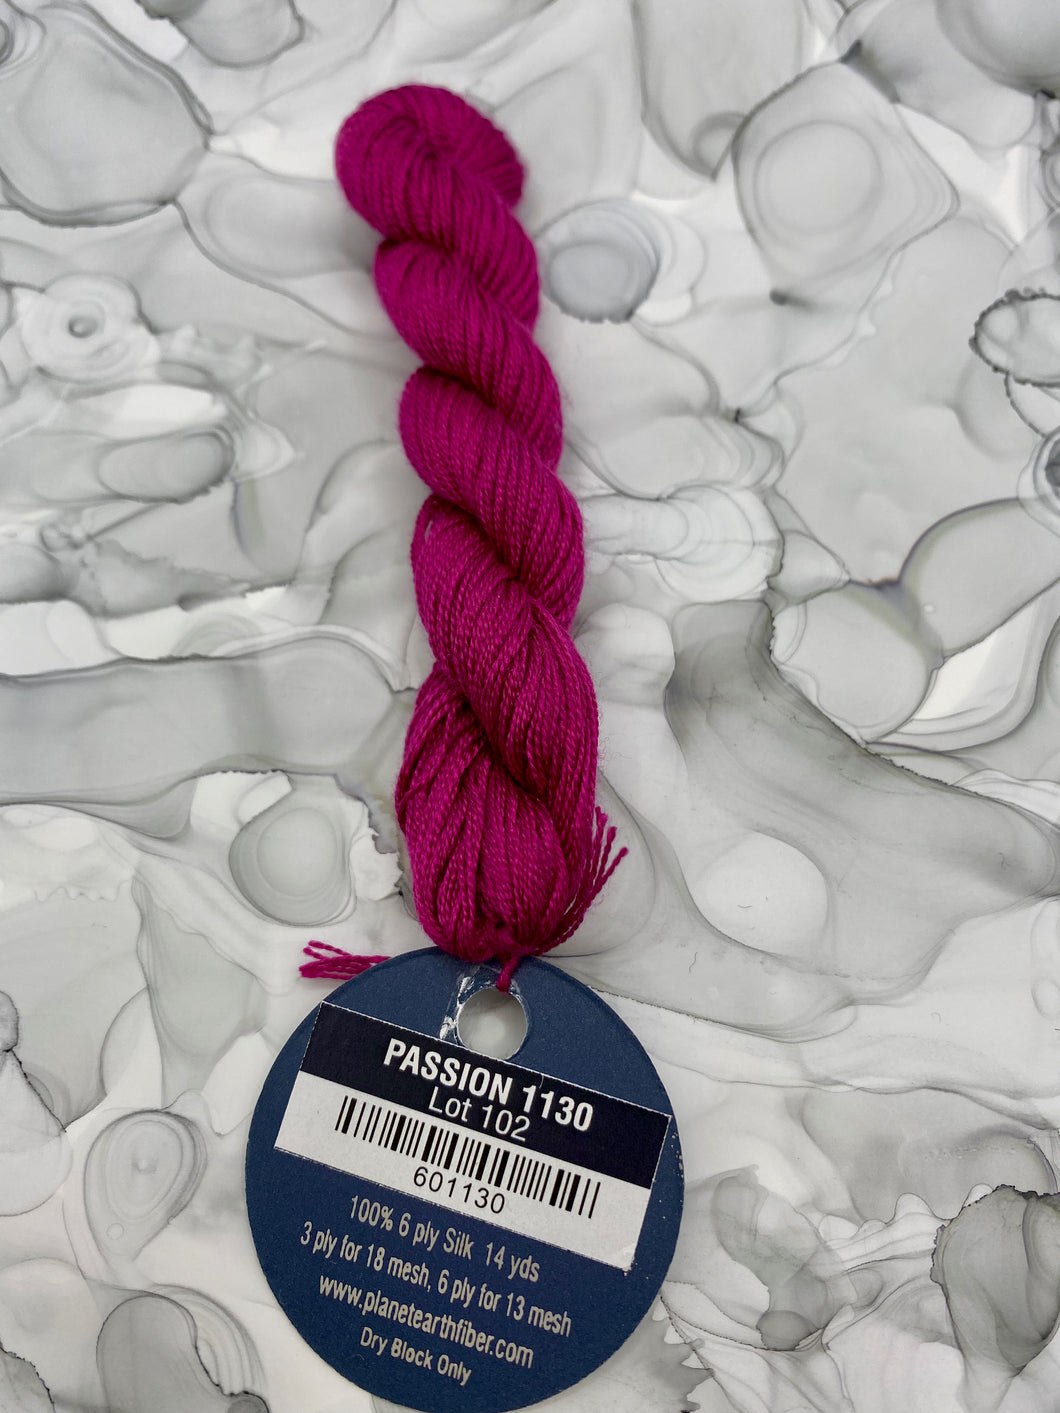 Passion (#1130) Planet Earth 6 ply silk